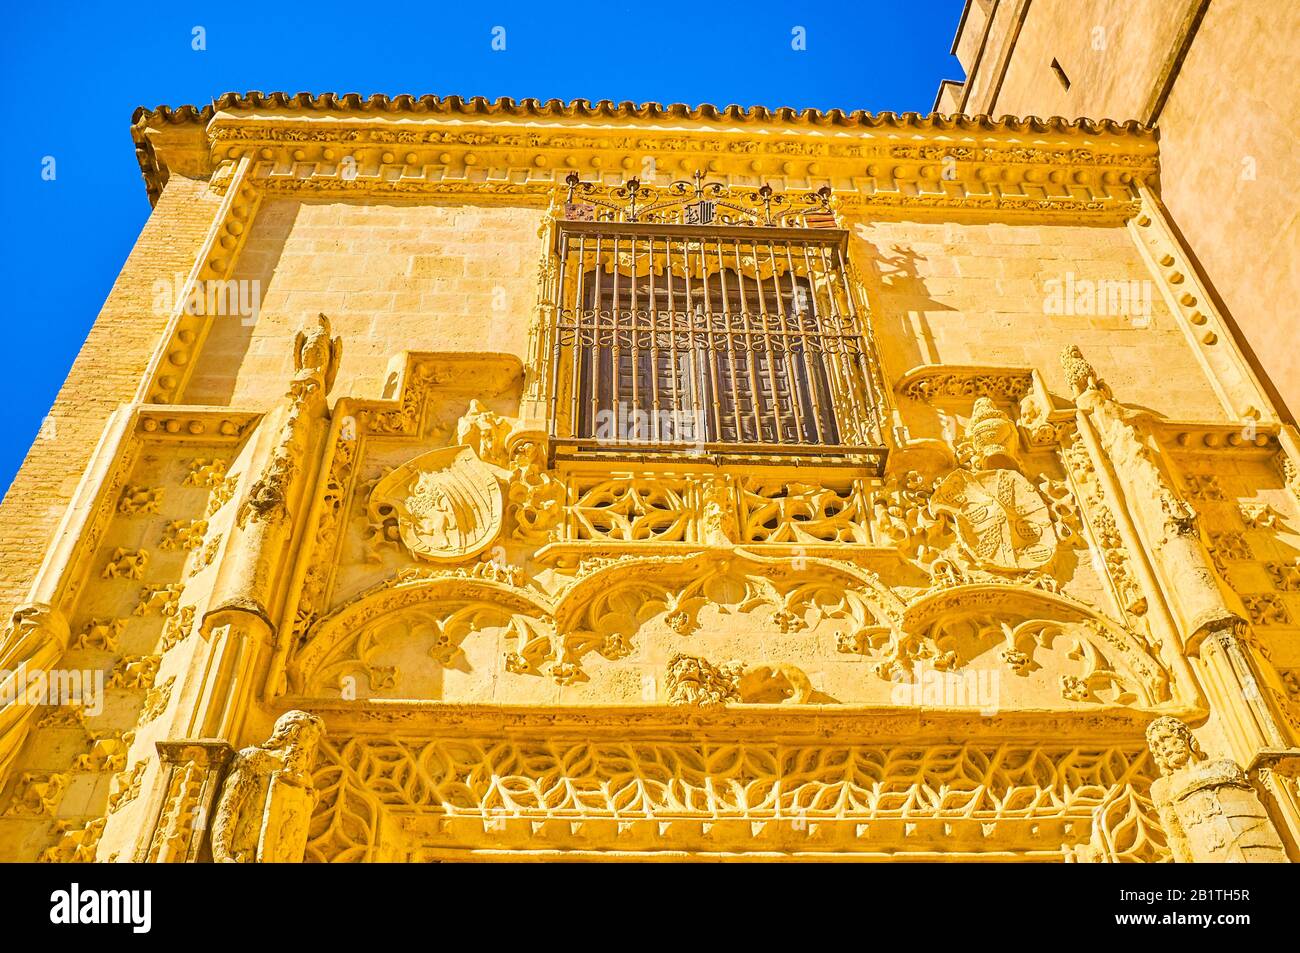 SEVILLE, SPAIN - OCTOBER 1, 2019: The beautiful stone carved decorations on Marchena Gates in mudejar style, on October 1 in Seville Stock Photo